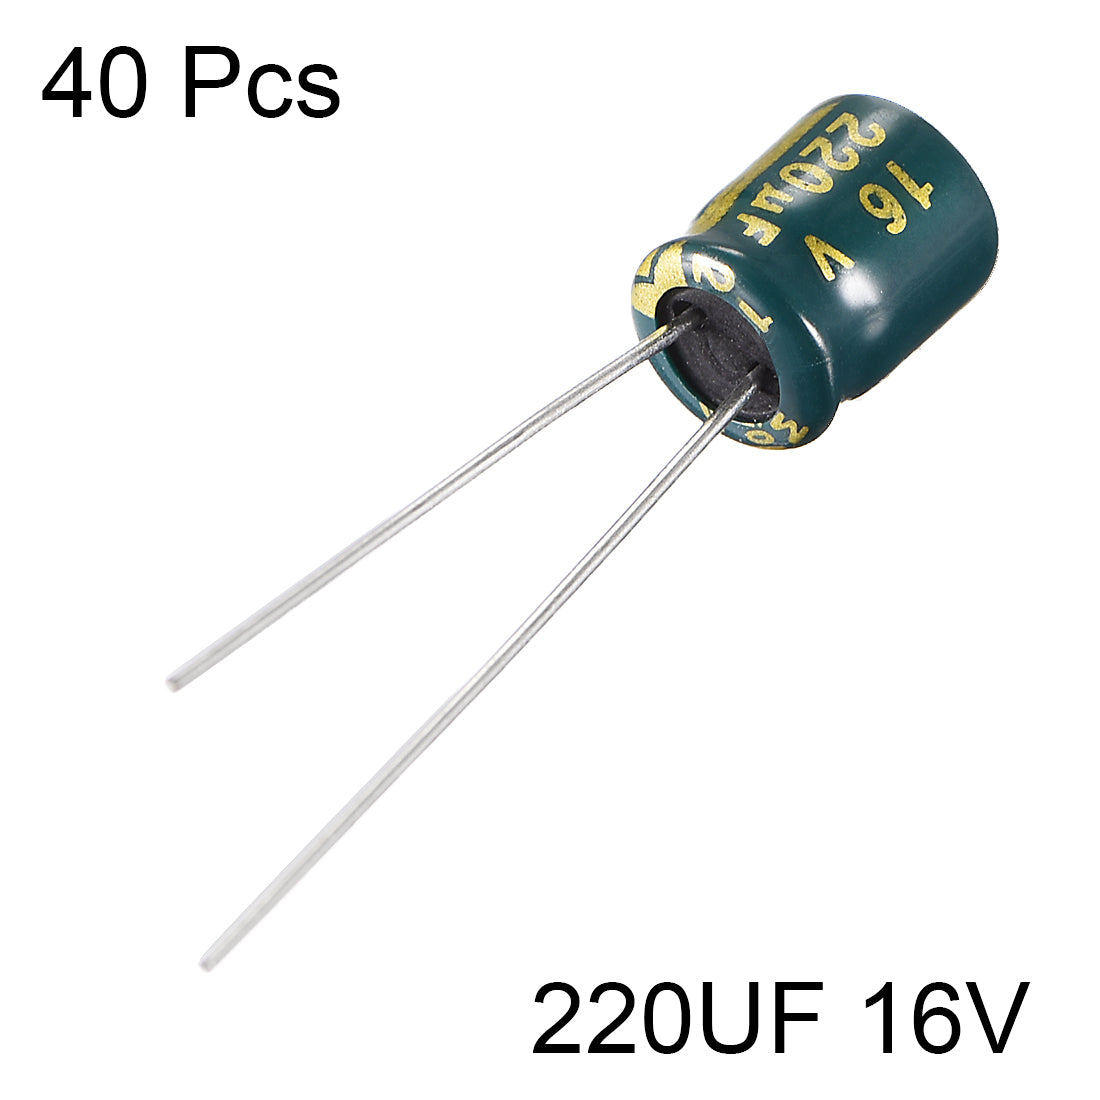 uxcell Uxcell Aluminum Radial Electrolytic Capacitor Low ESR Green with 220UF 16V 105 Celsius Life 3000H 6 x 7 mm High Ripple Current,Low Impedance 40pcs